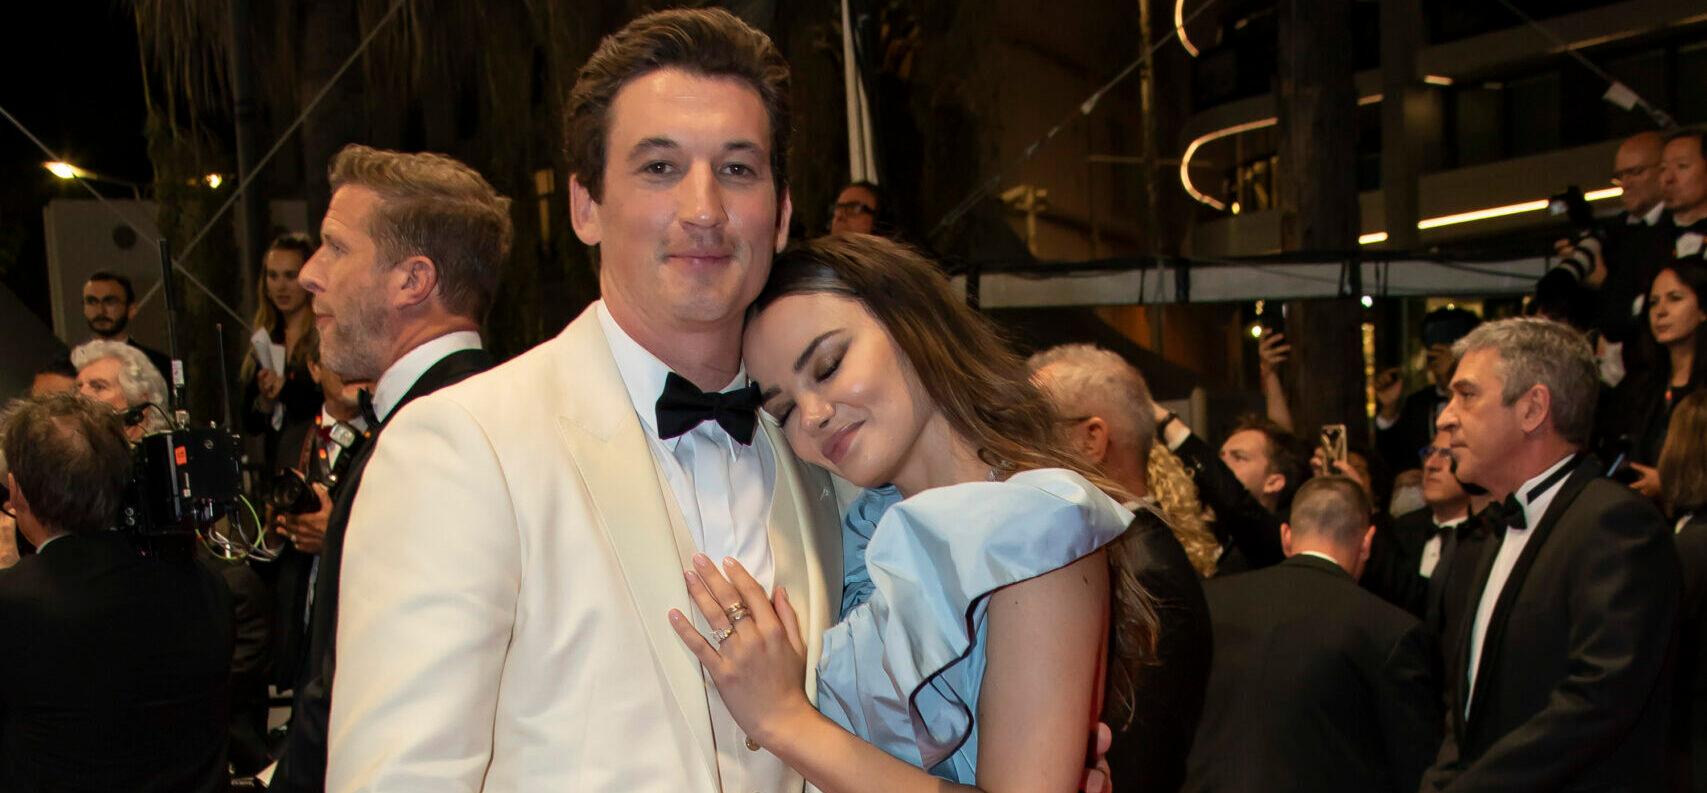 75th annual Cannes film festival at Palais des Festivals on May 18, 2022 in Cannes. 18 May 2022 Pictured: Miles Teller, Keleigh Sperry. Photo credit: KCS Presse / MEGA TheMegaAgency.com +1 888 505 6342 (Mega Agency TagID: MEGA859198_022.jpg) [Photo via Mega Agency]